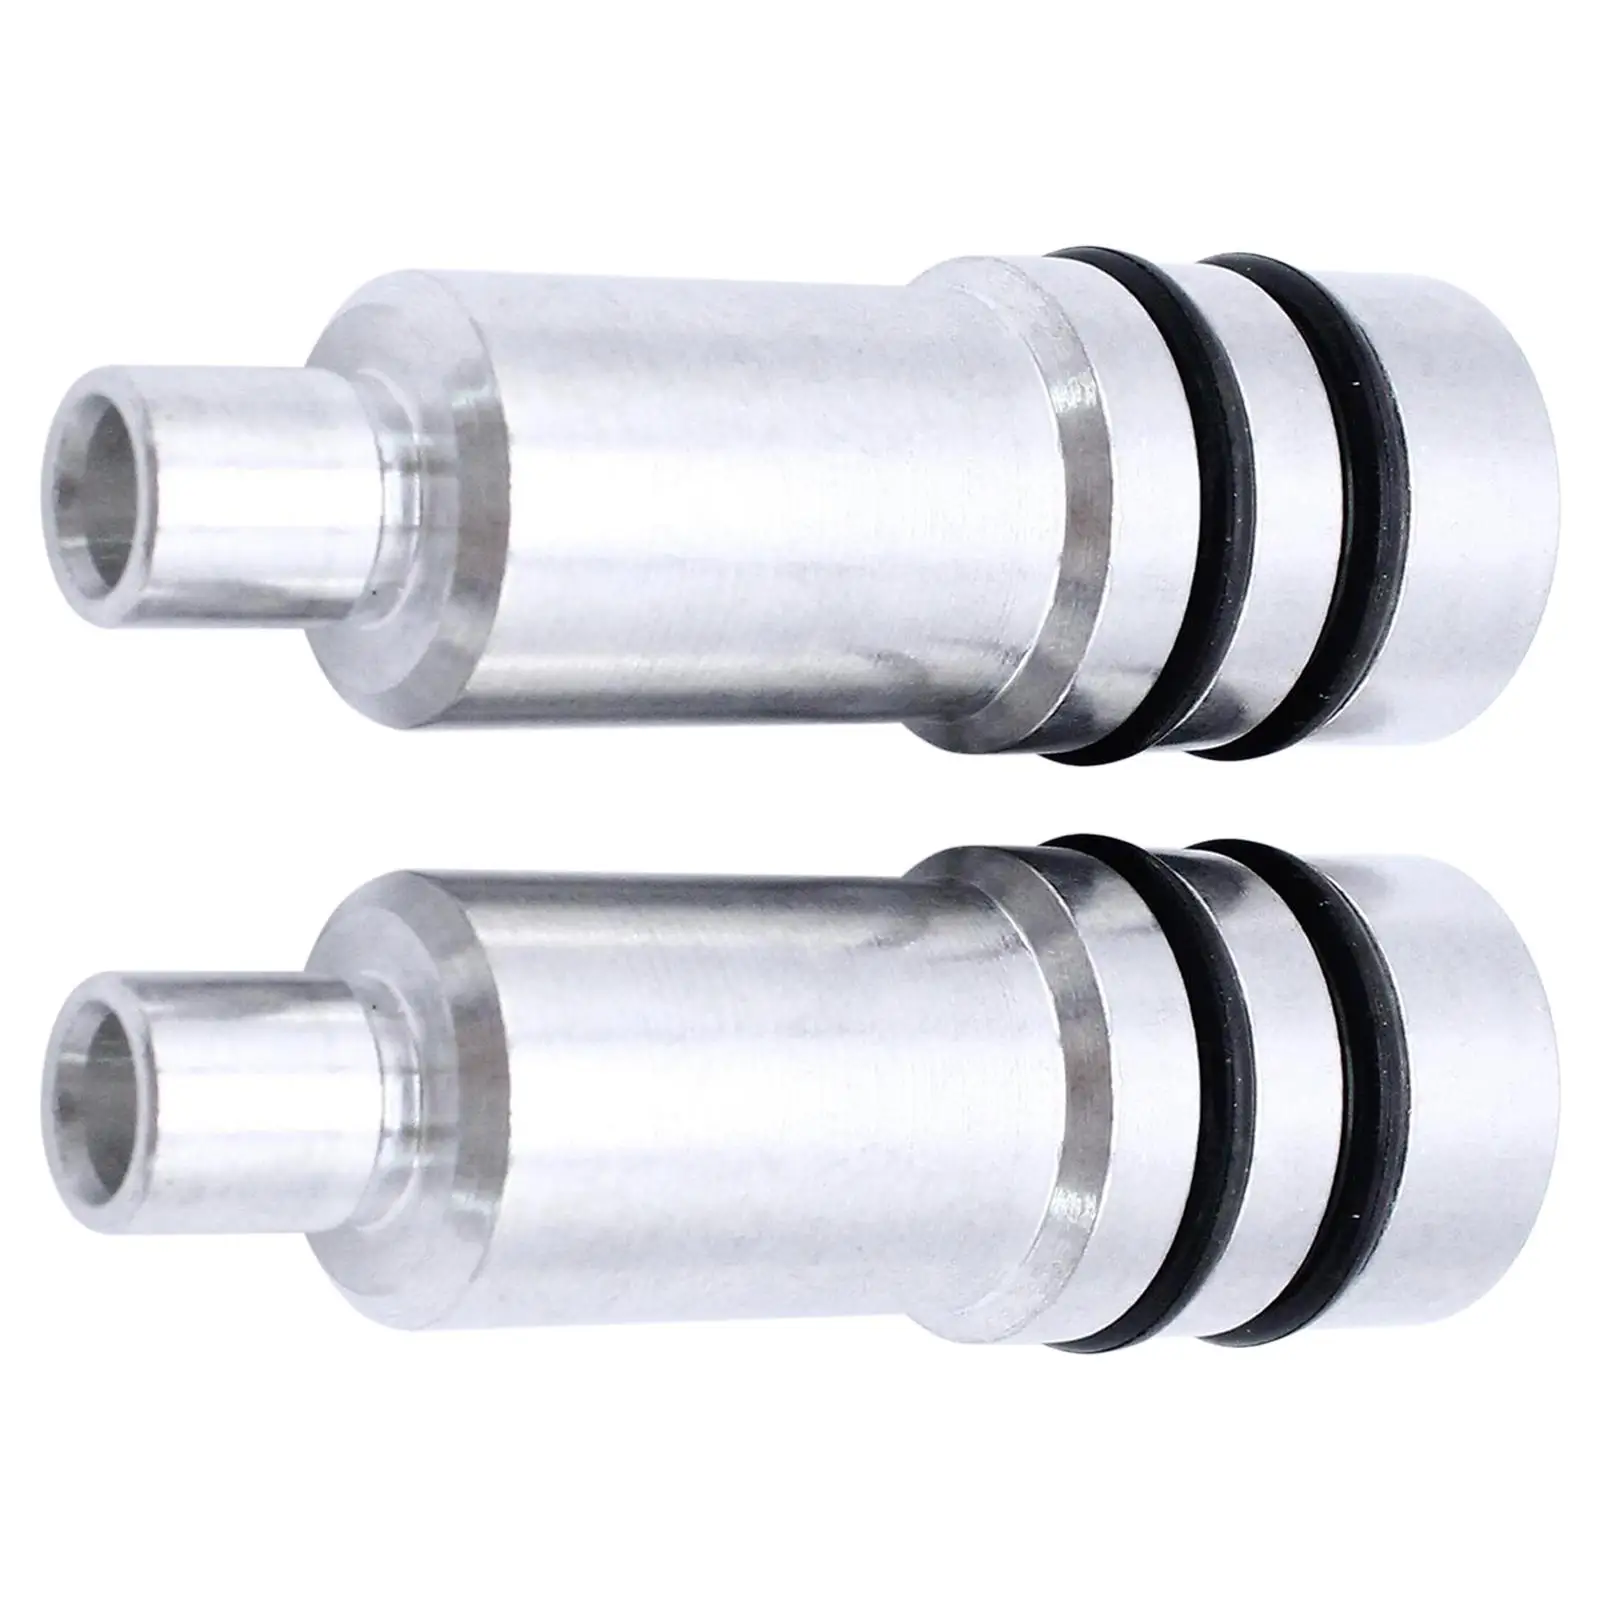 2x Fuel Injector Sleeves Cups 0817384 for H Z14Dtl 80 PS Z17Dth 100 PS